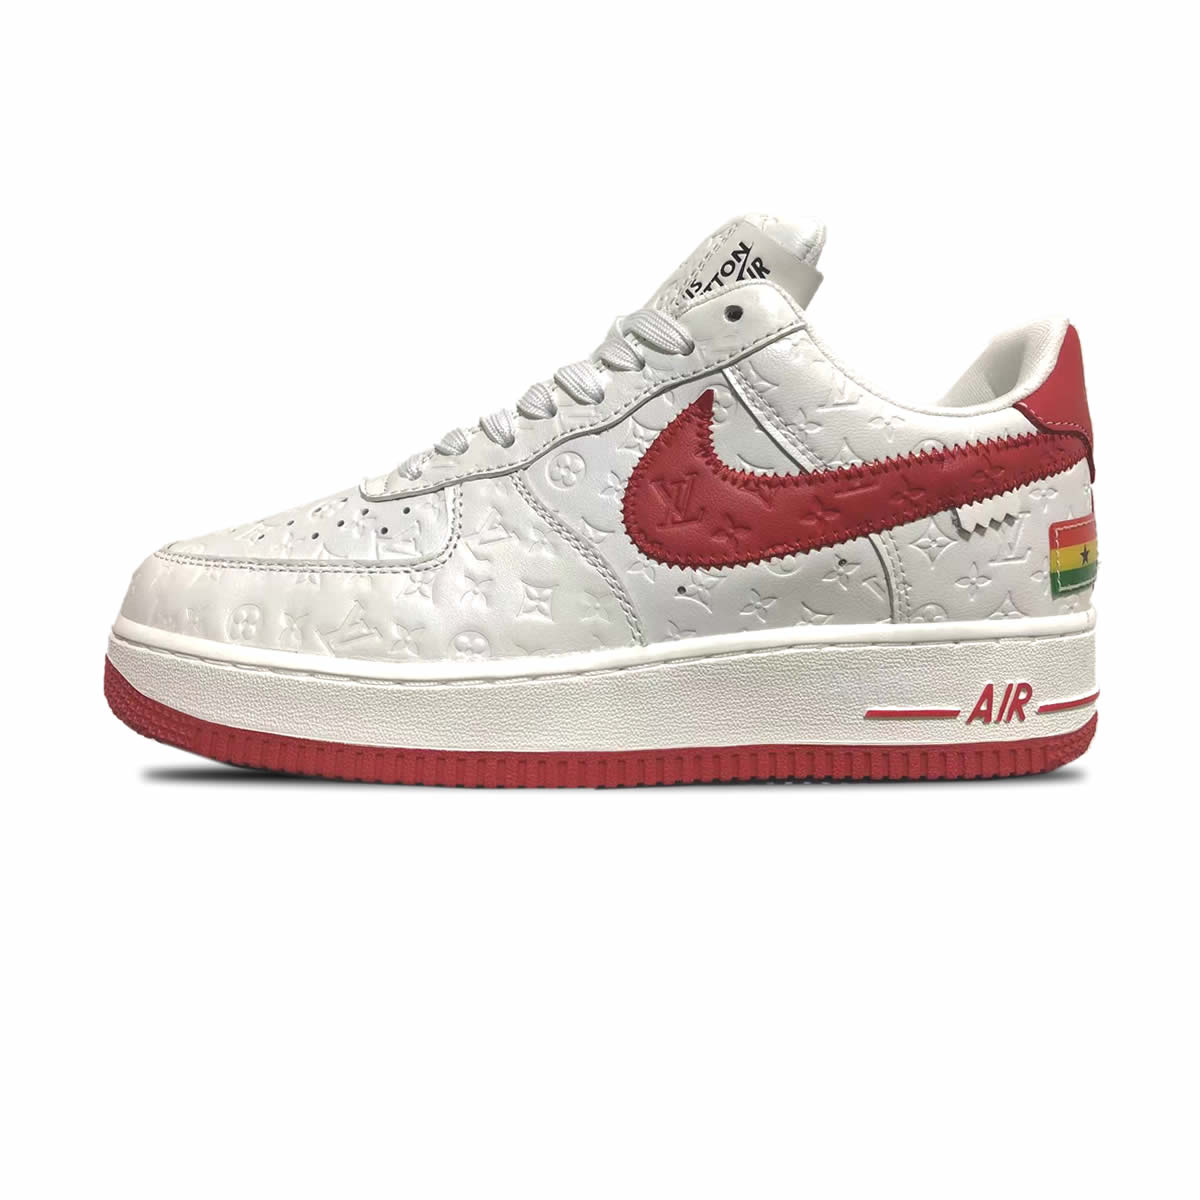 Louis Vuitton Air Force 1 Trainer Sneaker White Red Ms0232 1 - kickbulk.co